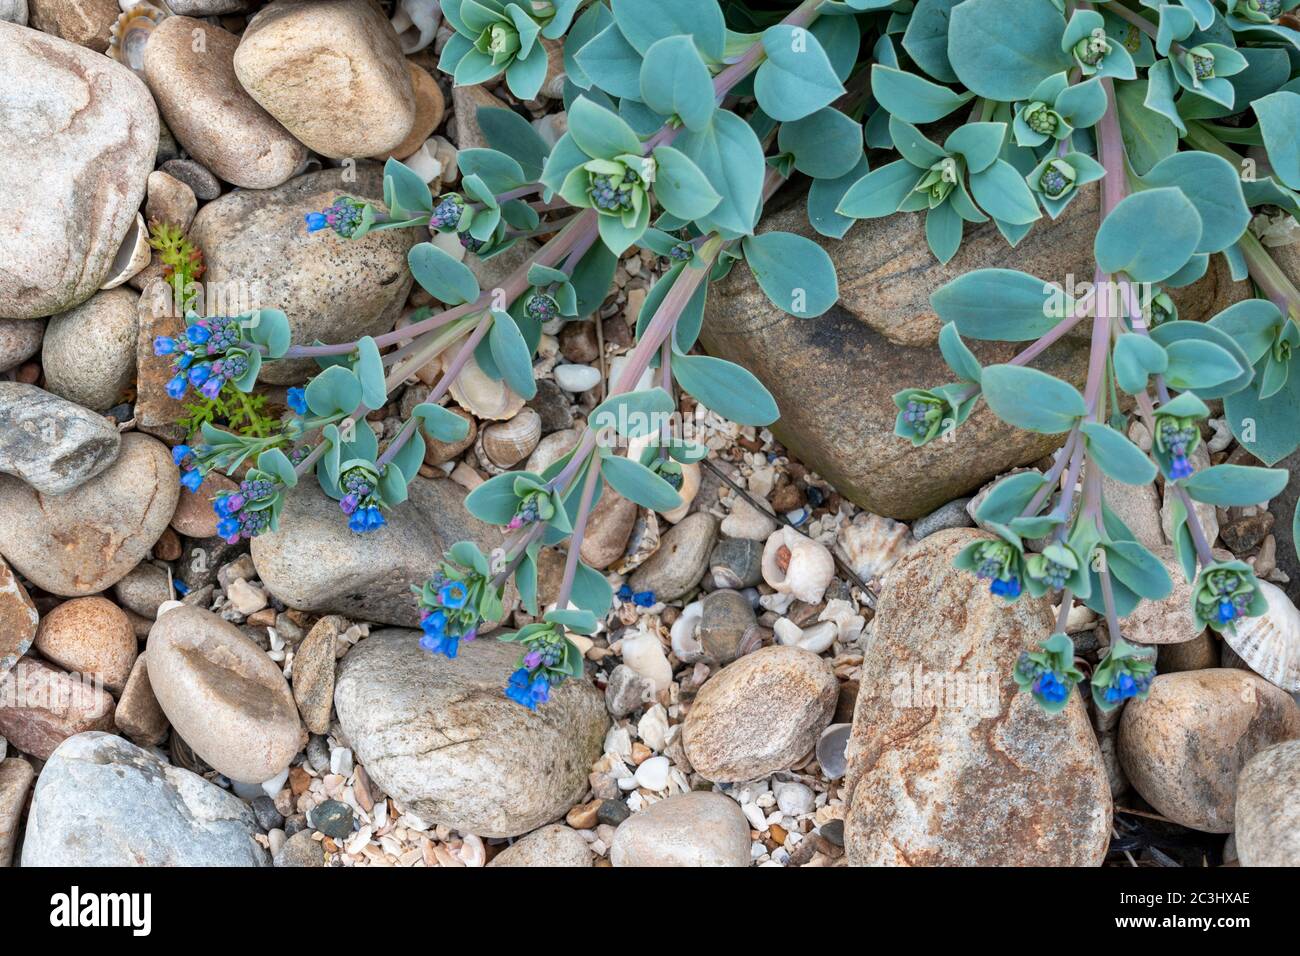 OYSTERPLANT Mertensia maritima A SMALL BLUE GREEN PLANT AND STEMS WITH BRIGHT BLUE AND PINK FLOWERS ON A SEASHELL AND ROCK COVERED BEACH MORAY COAST S Stock Photo